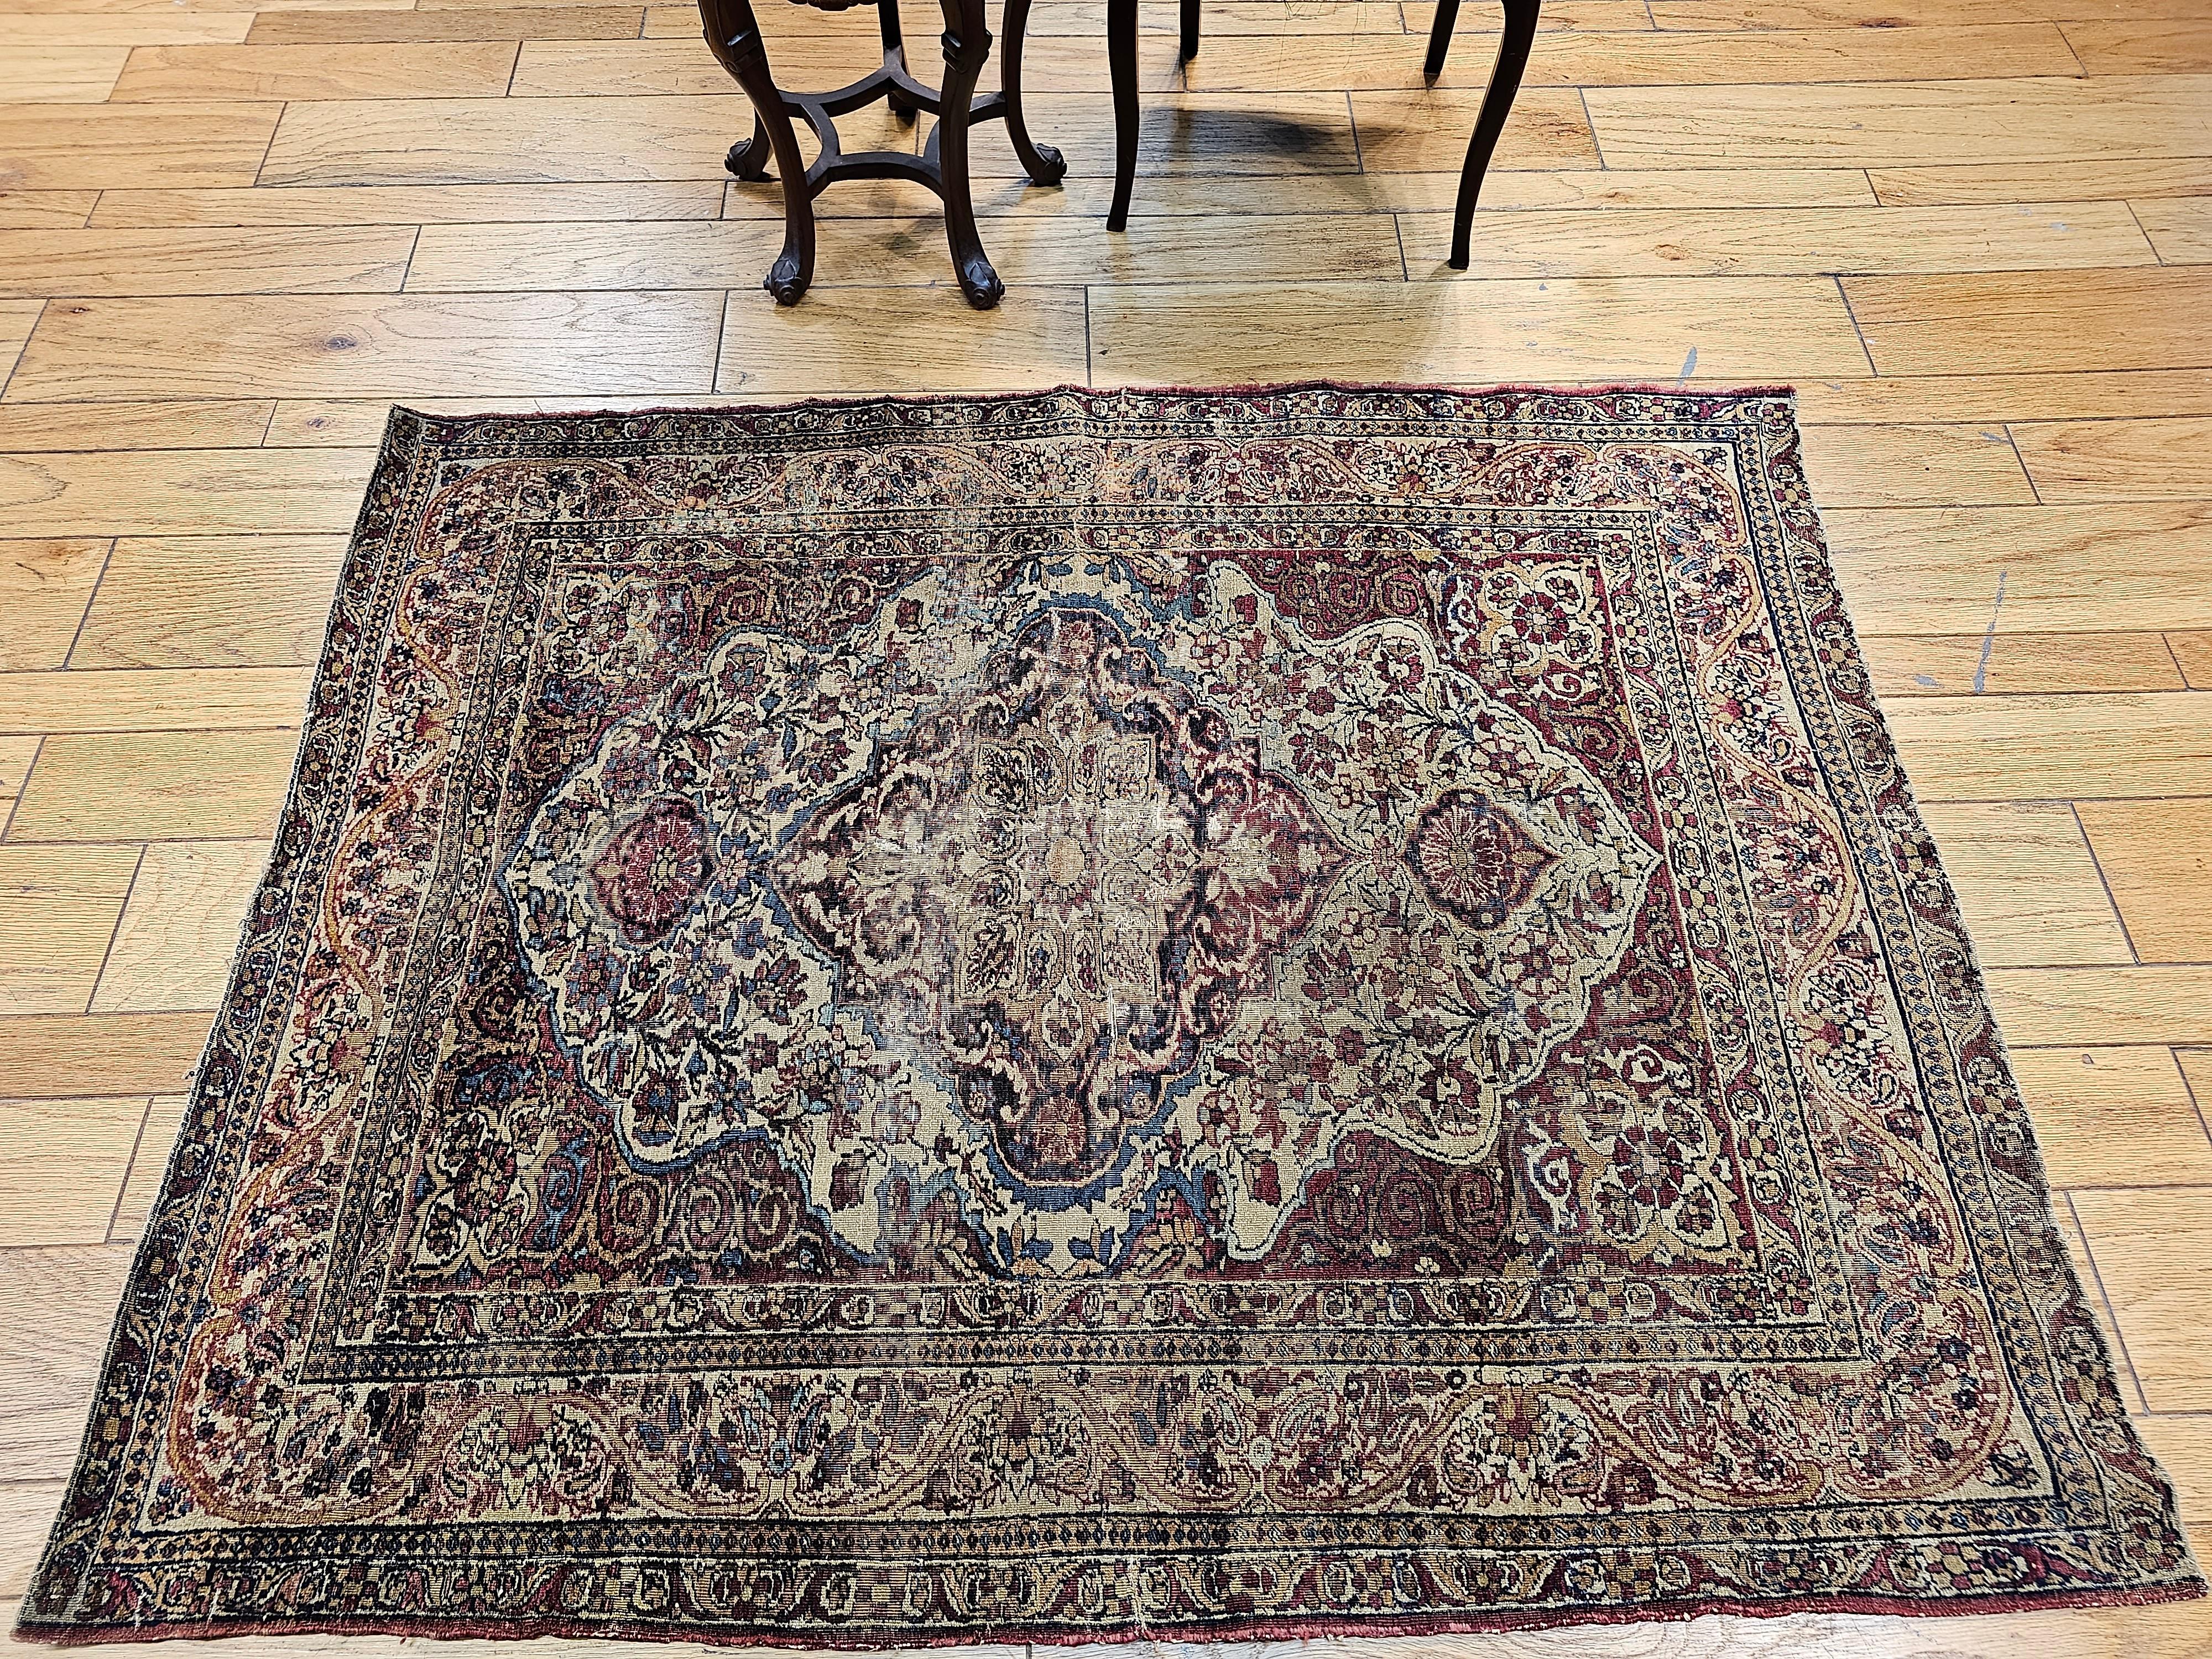 19th-Century Persian Kerman Lavar Area Rug in Floral Design in Ivory, Red, Blue For Sale 11